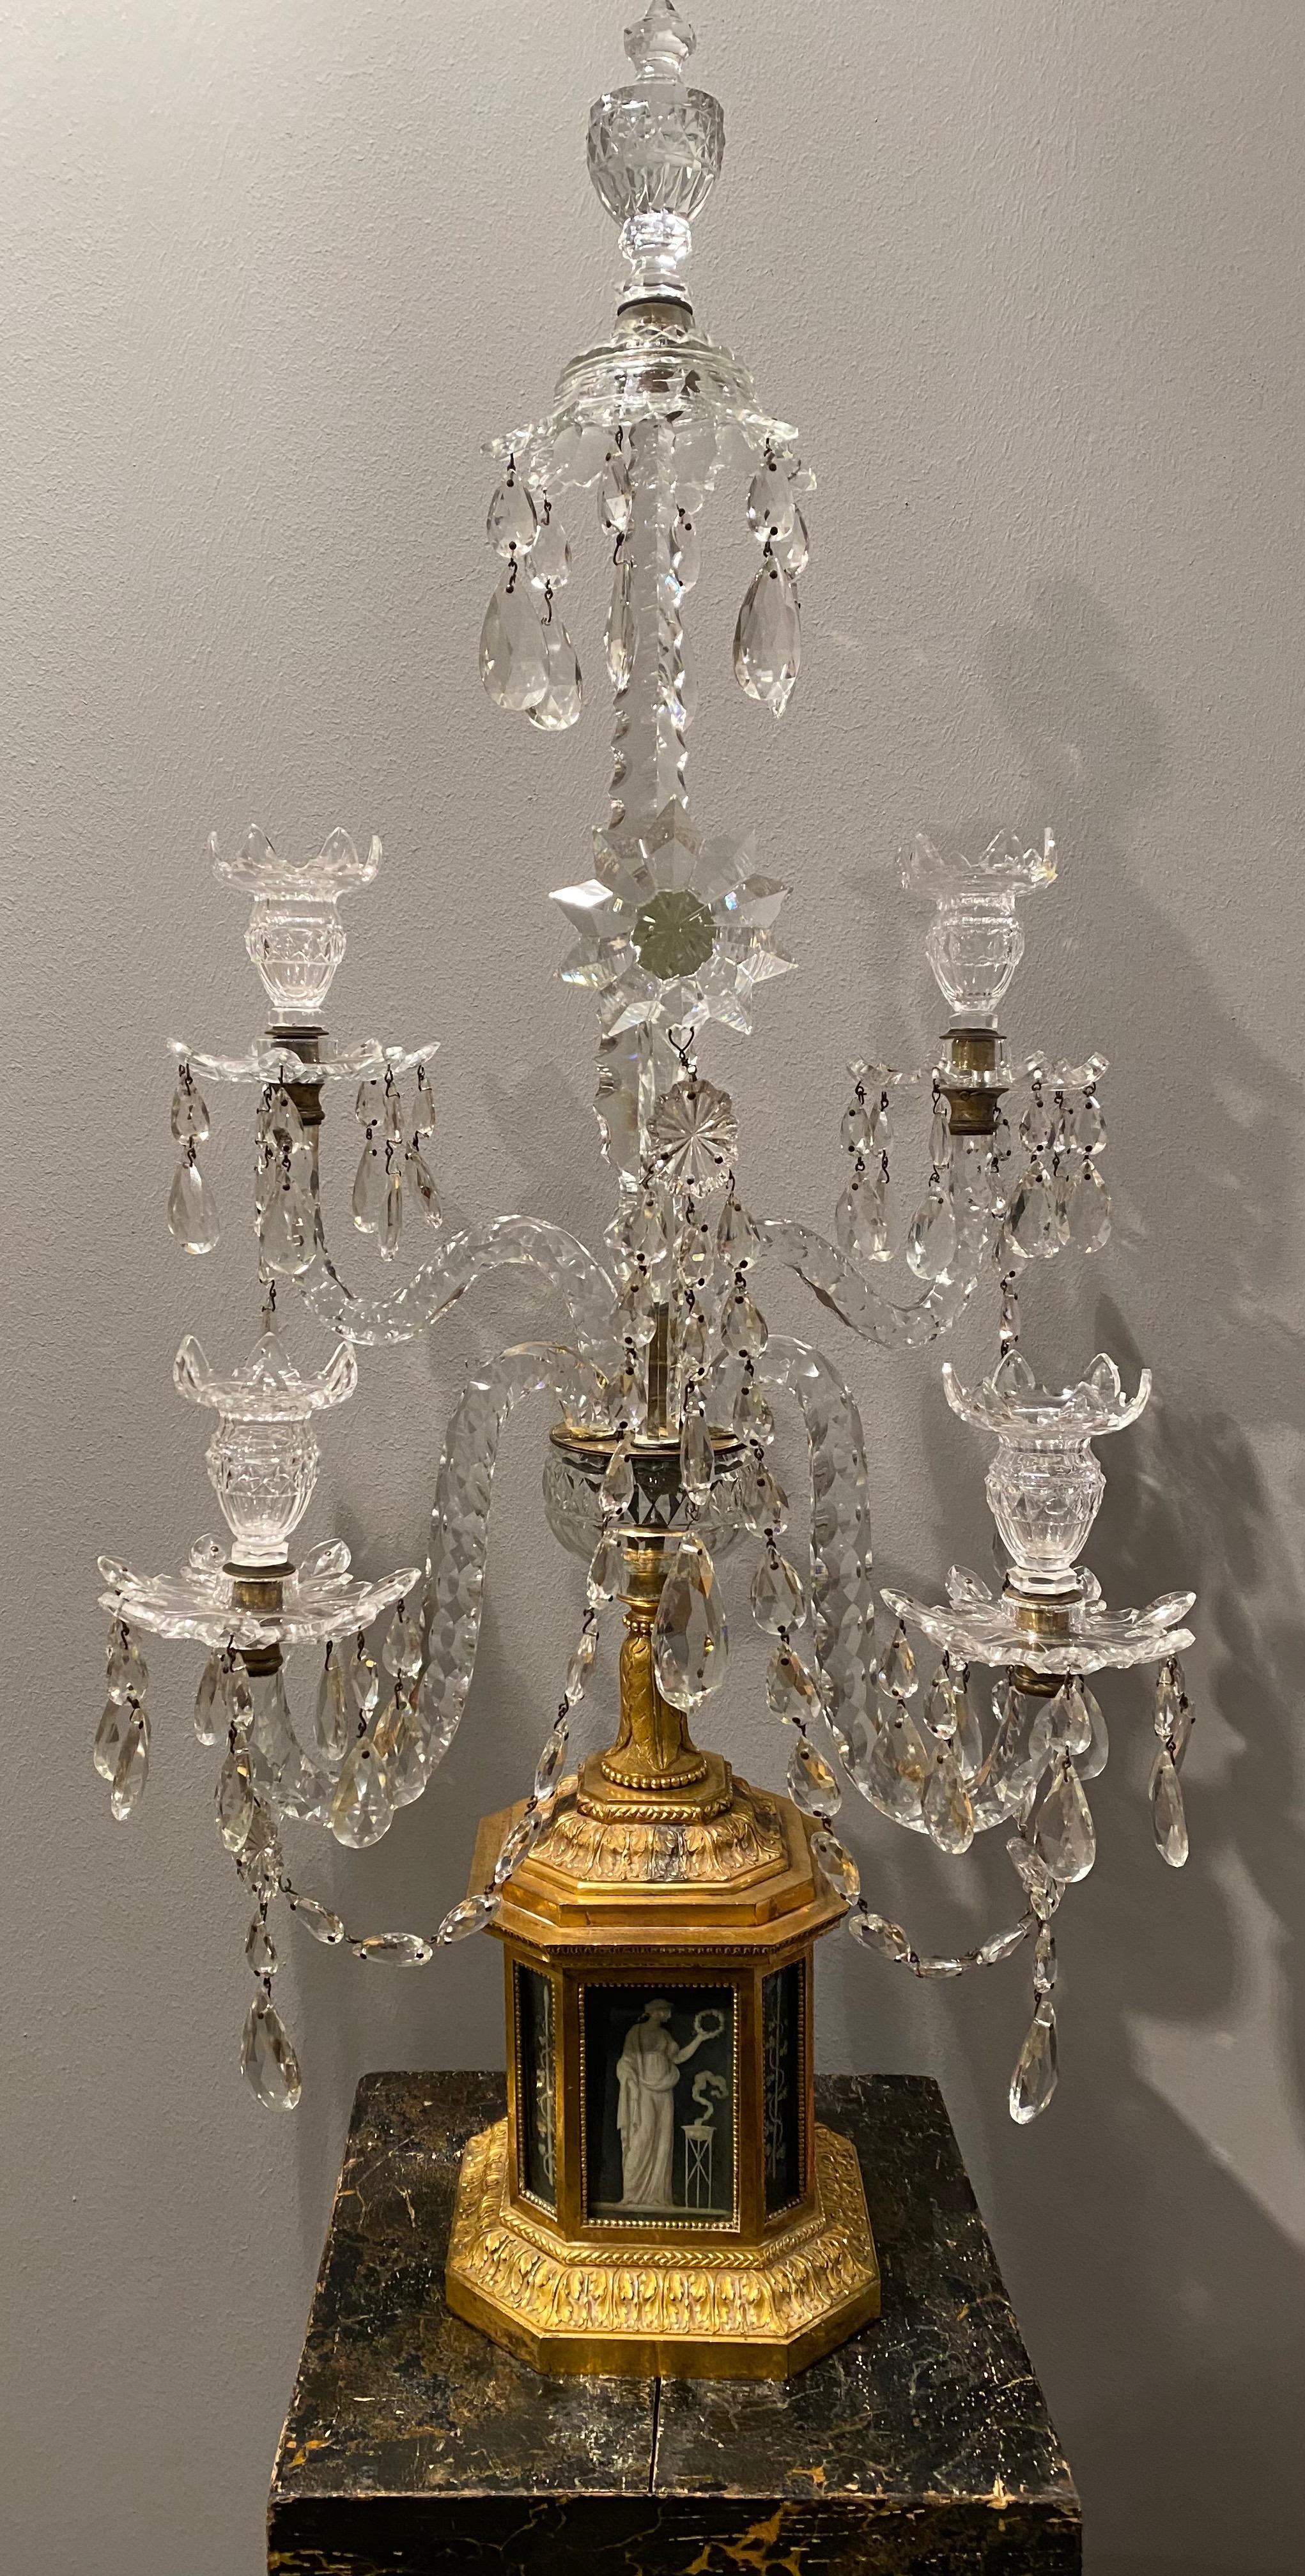 A pair of important and highly unusual candelabra from the 1780s. The bases are made of gilt bronze with inserted, glasscovered paintings. The paintings are by Piat-Joseph Sauvage (1744-1818). They are depicting different classical figures and